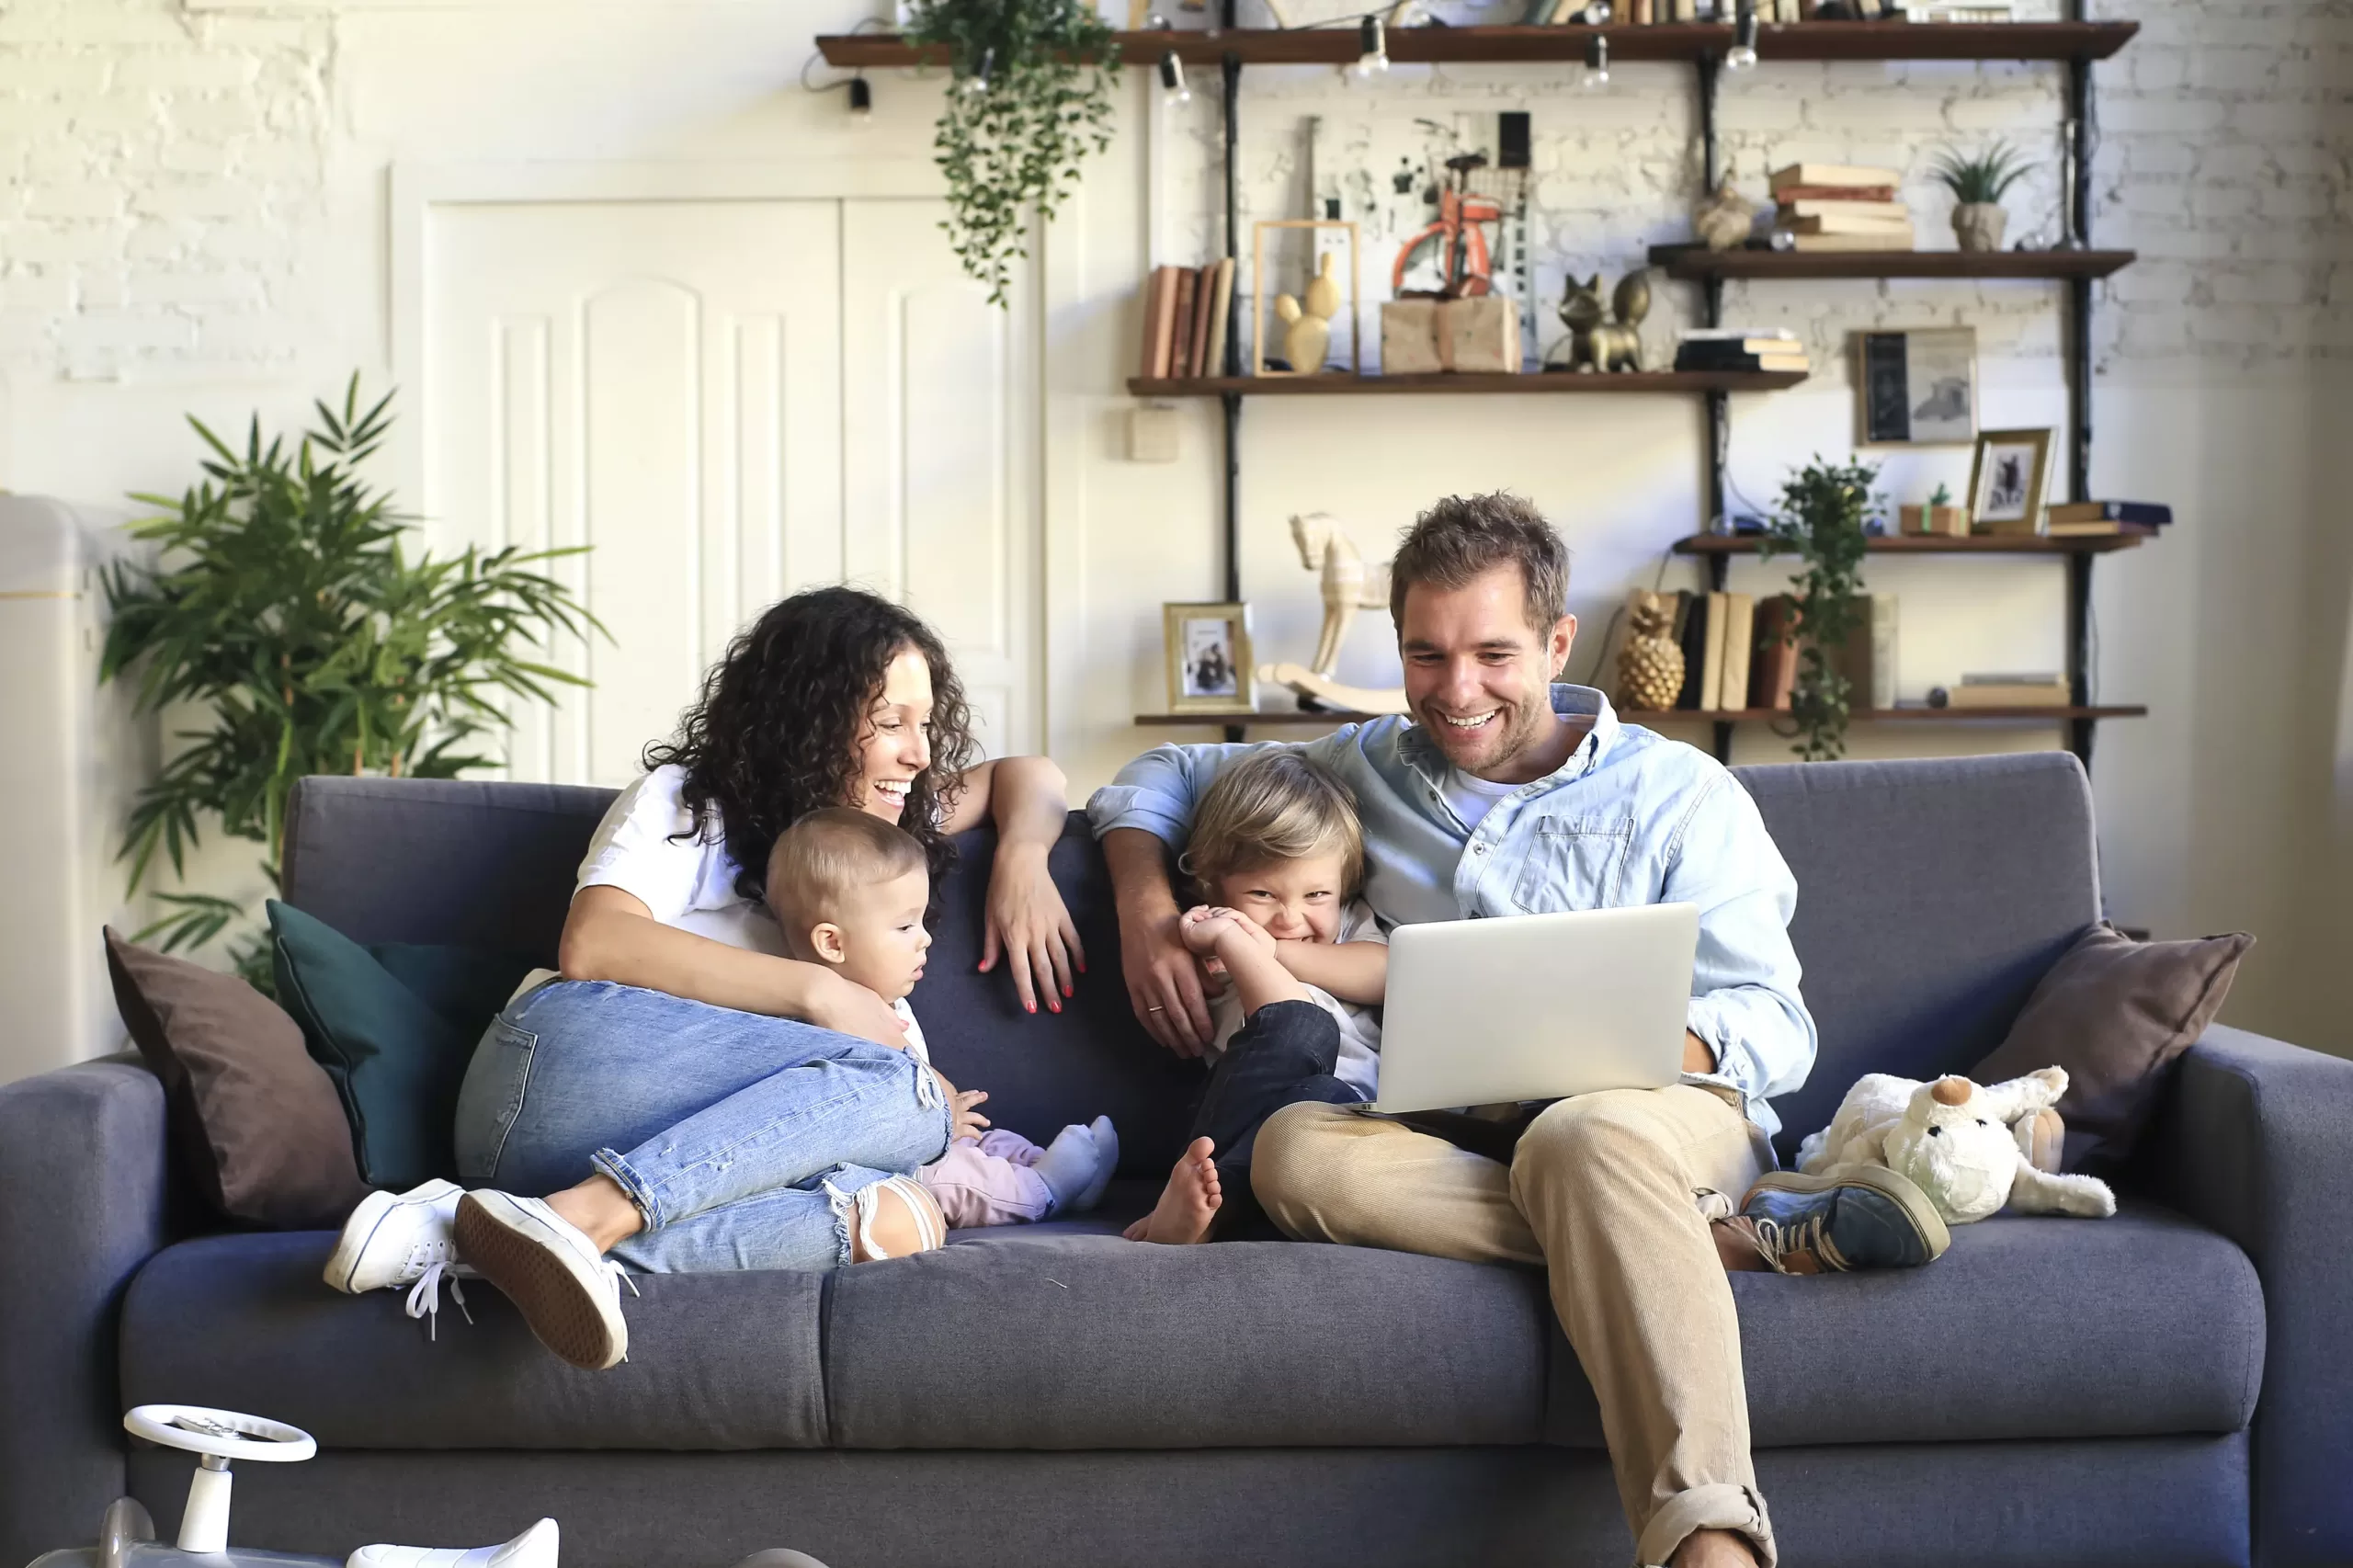 Family sit together on couch in lounge